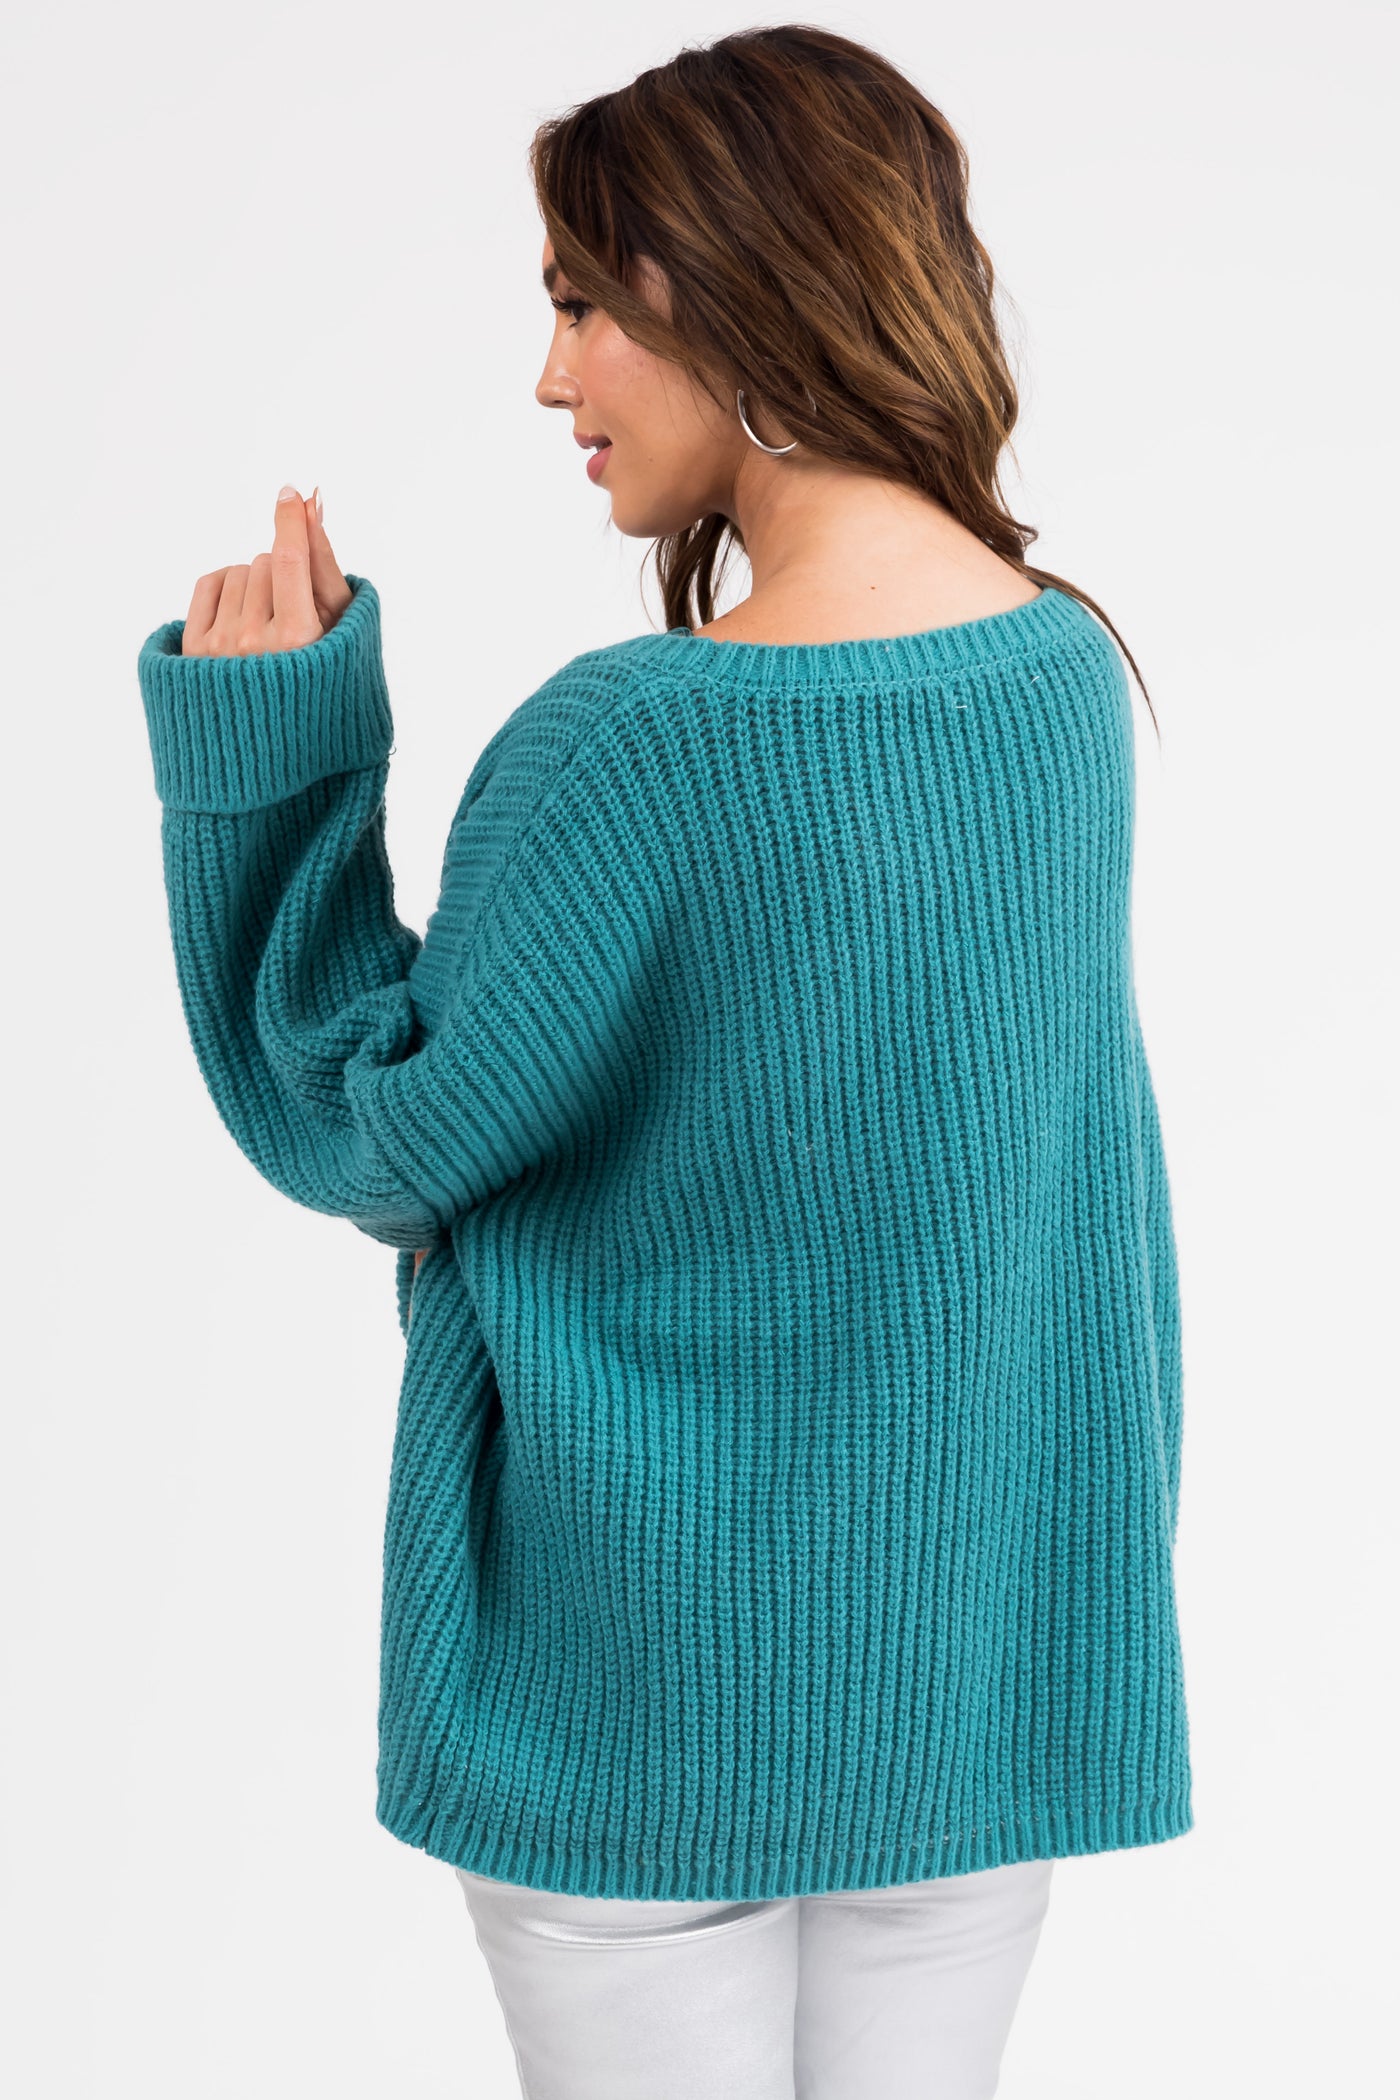 Teal Oversized Chest Pocket Cozy Sweater